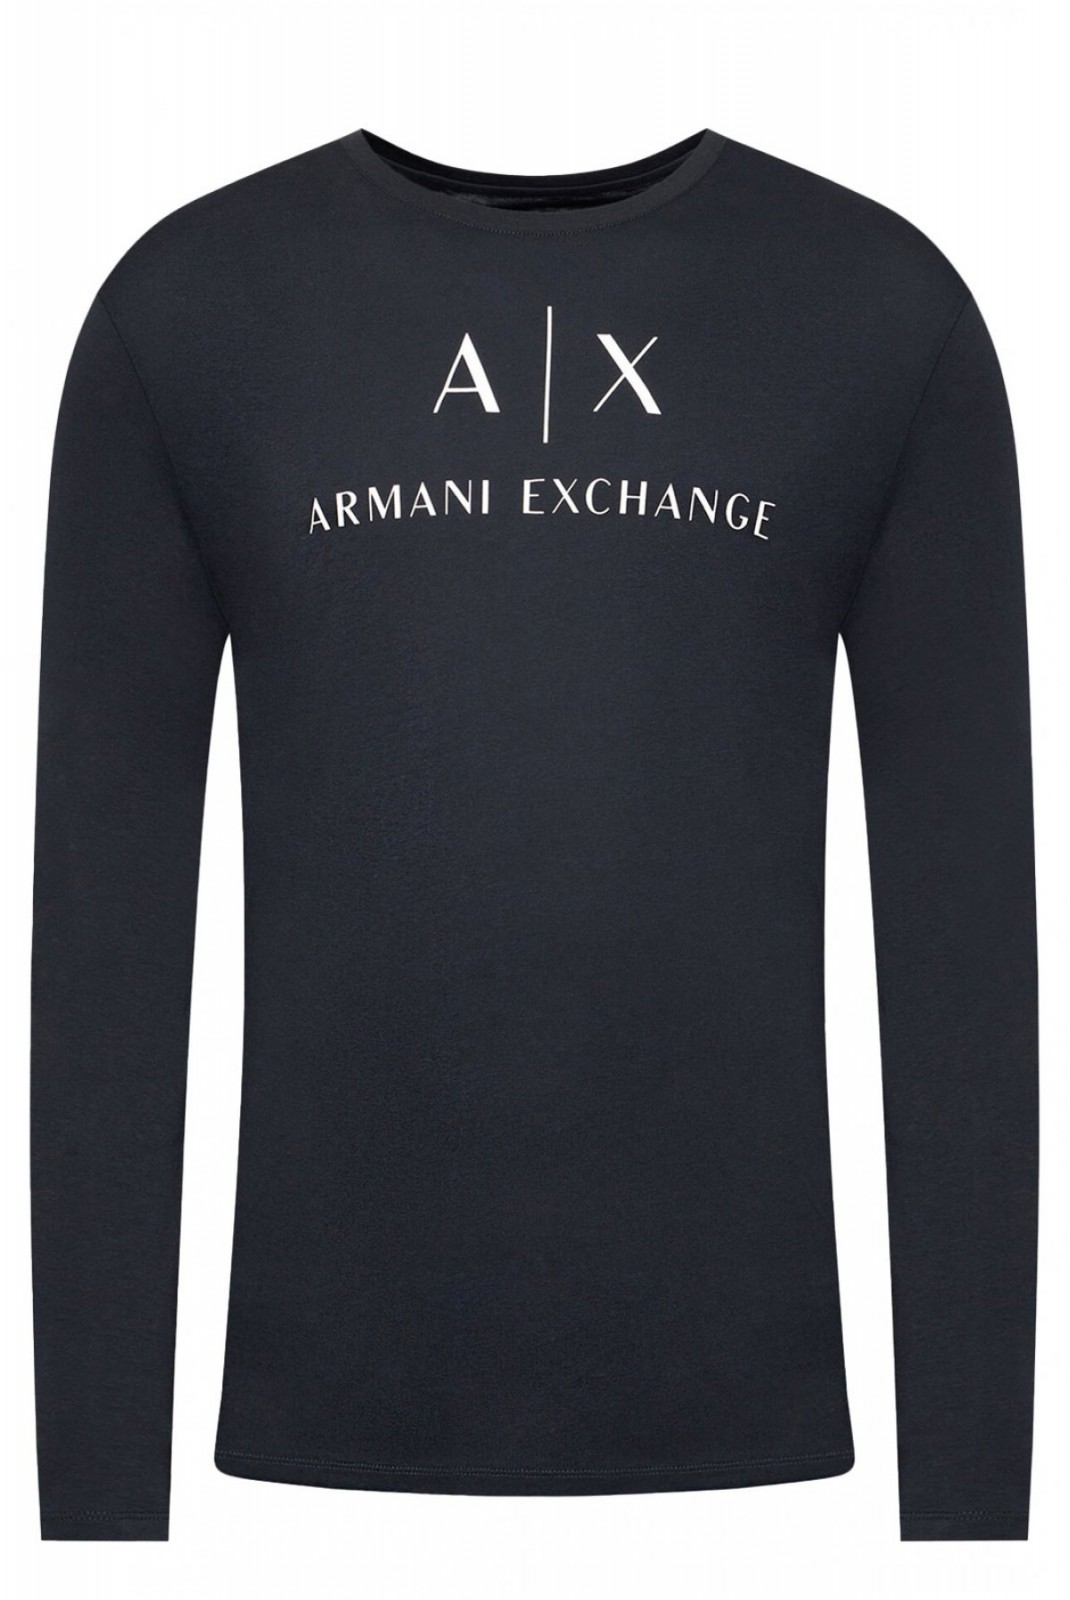 Tee shirt manches longues iconique Armani exchange 1510 NAVY 8NZTCH Z8H4Z